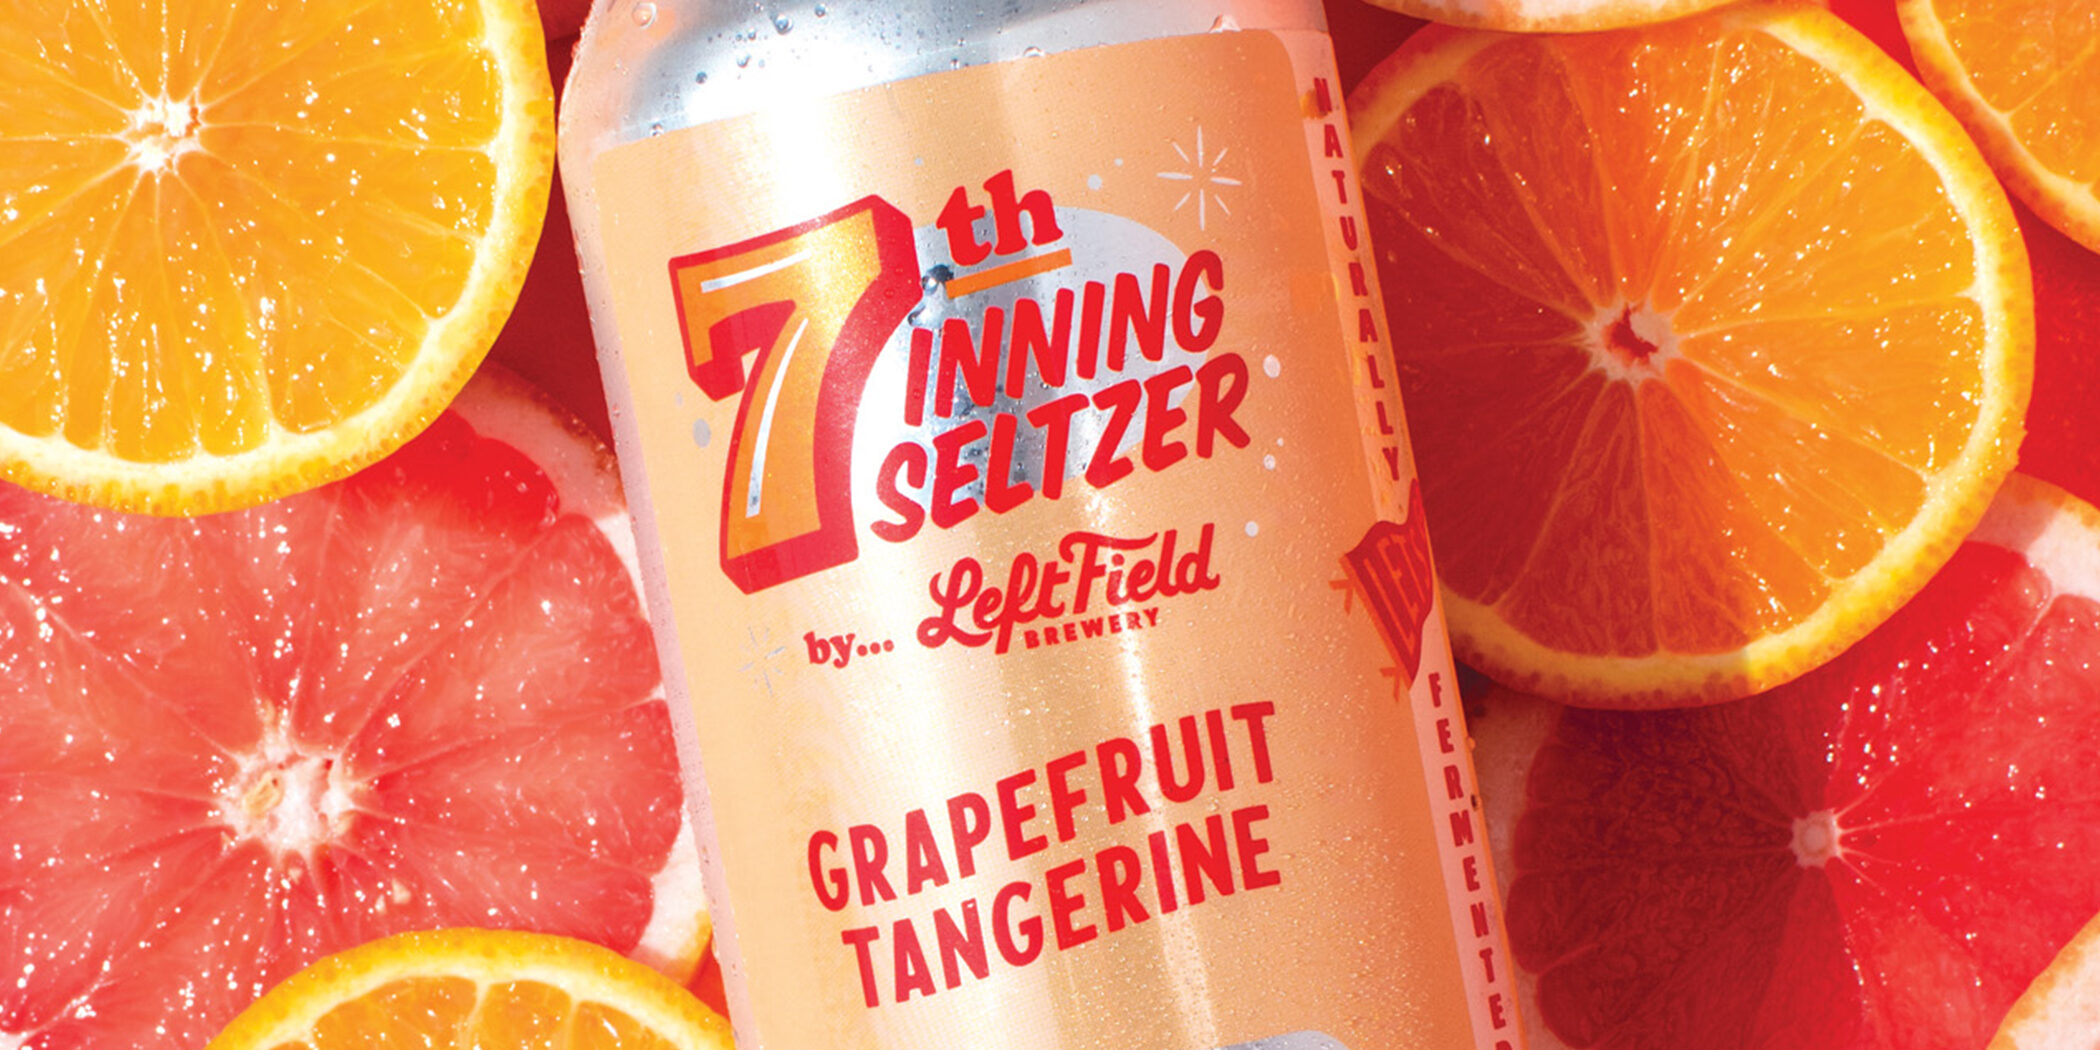 7th Inning Seltzer by Left Field Brewery